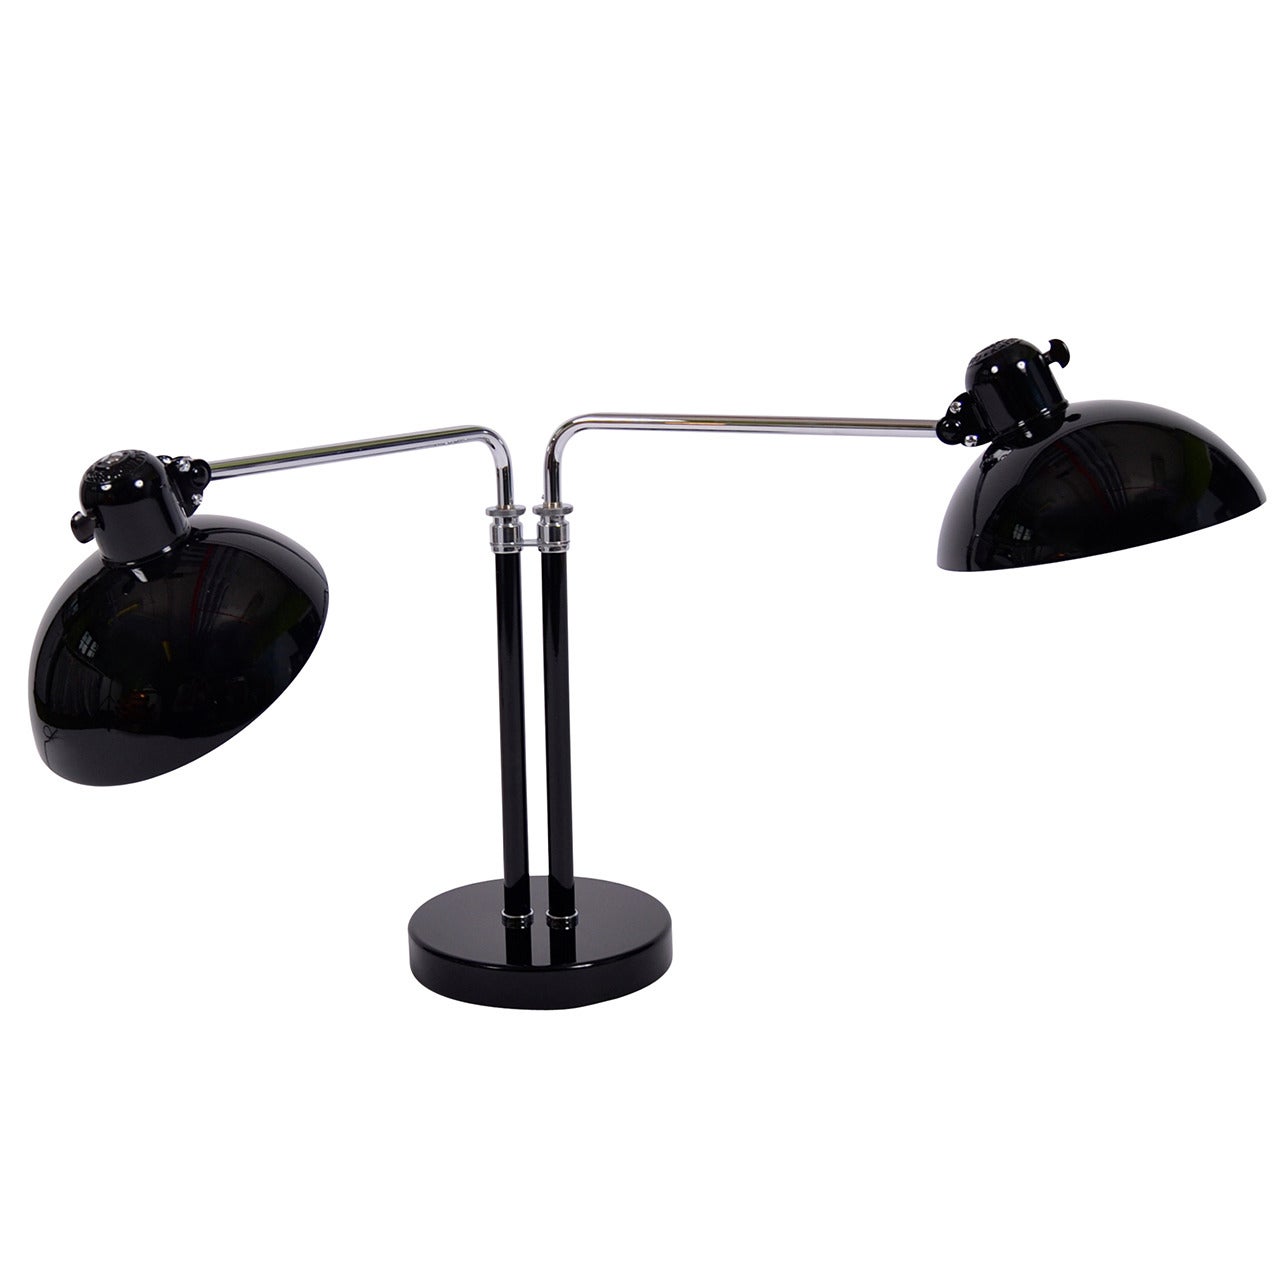 Stunning Christian Dell, Kaiser Double Lamp 2 identical lamps available